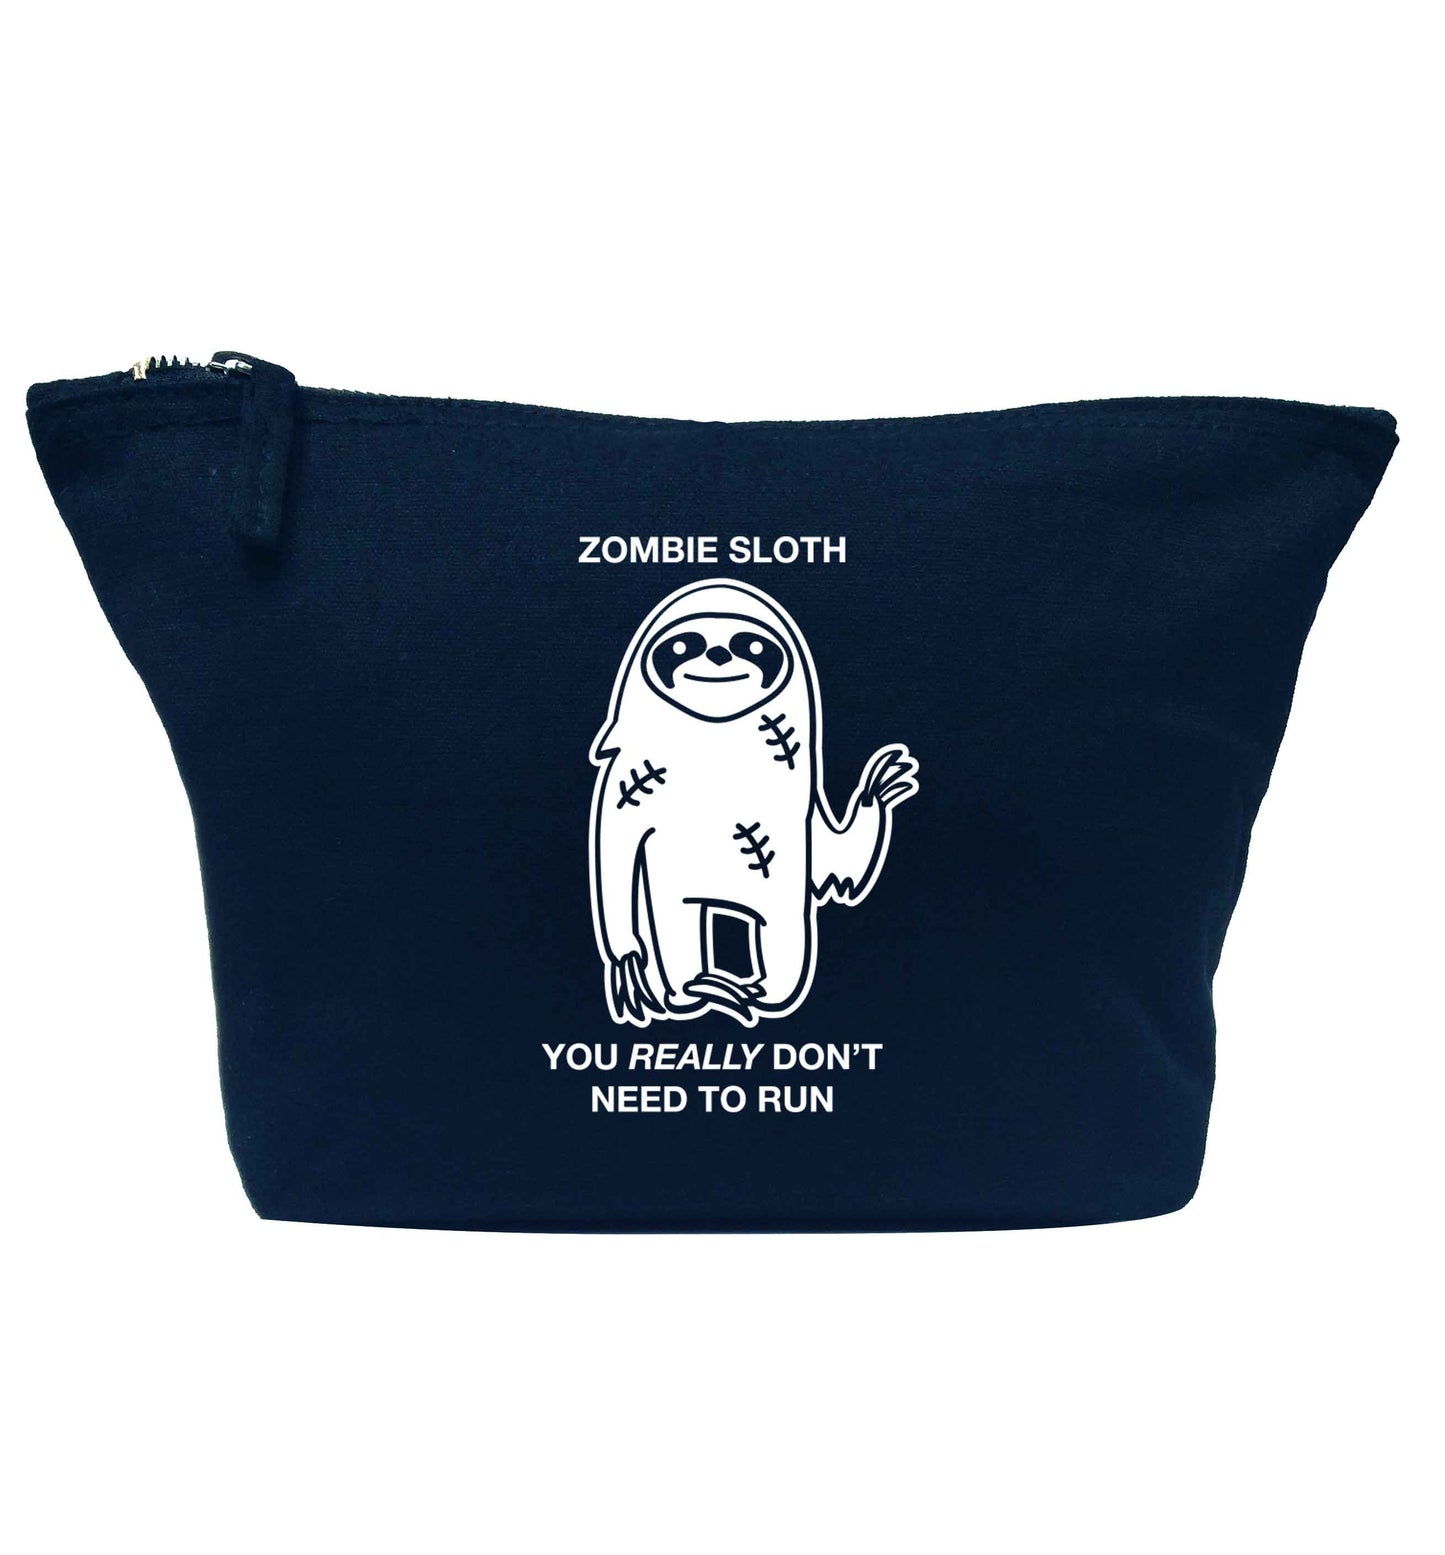 Zombie sloth you really don't need to run navy makeup bag